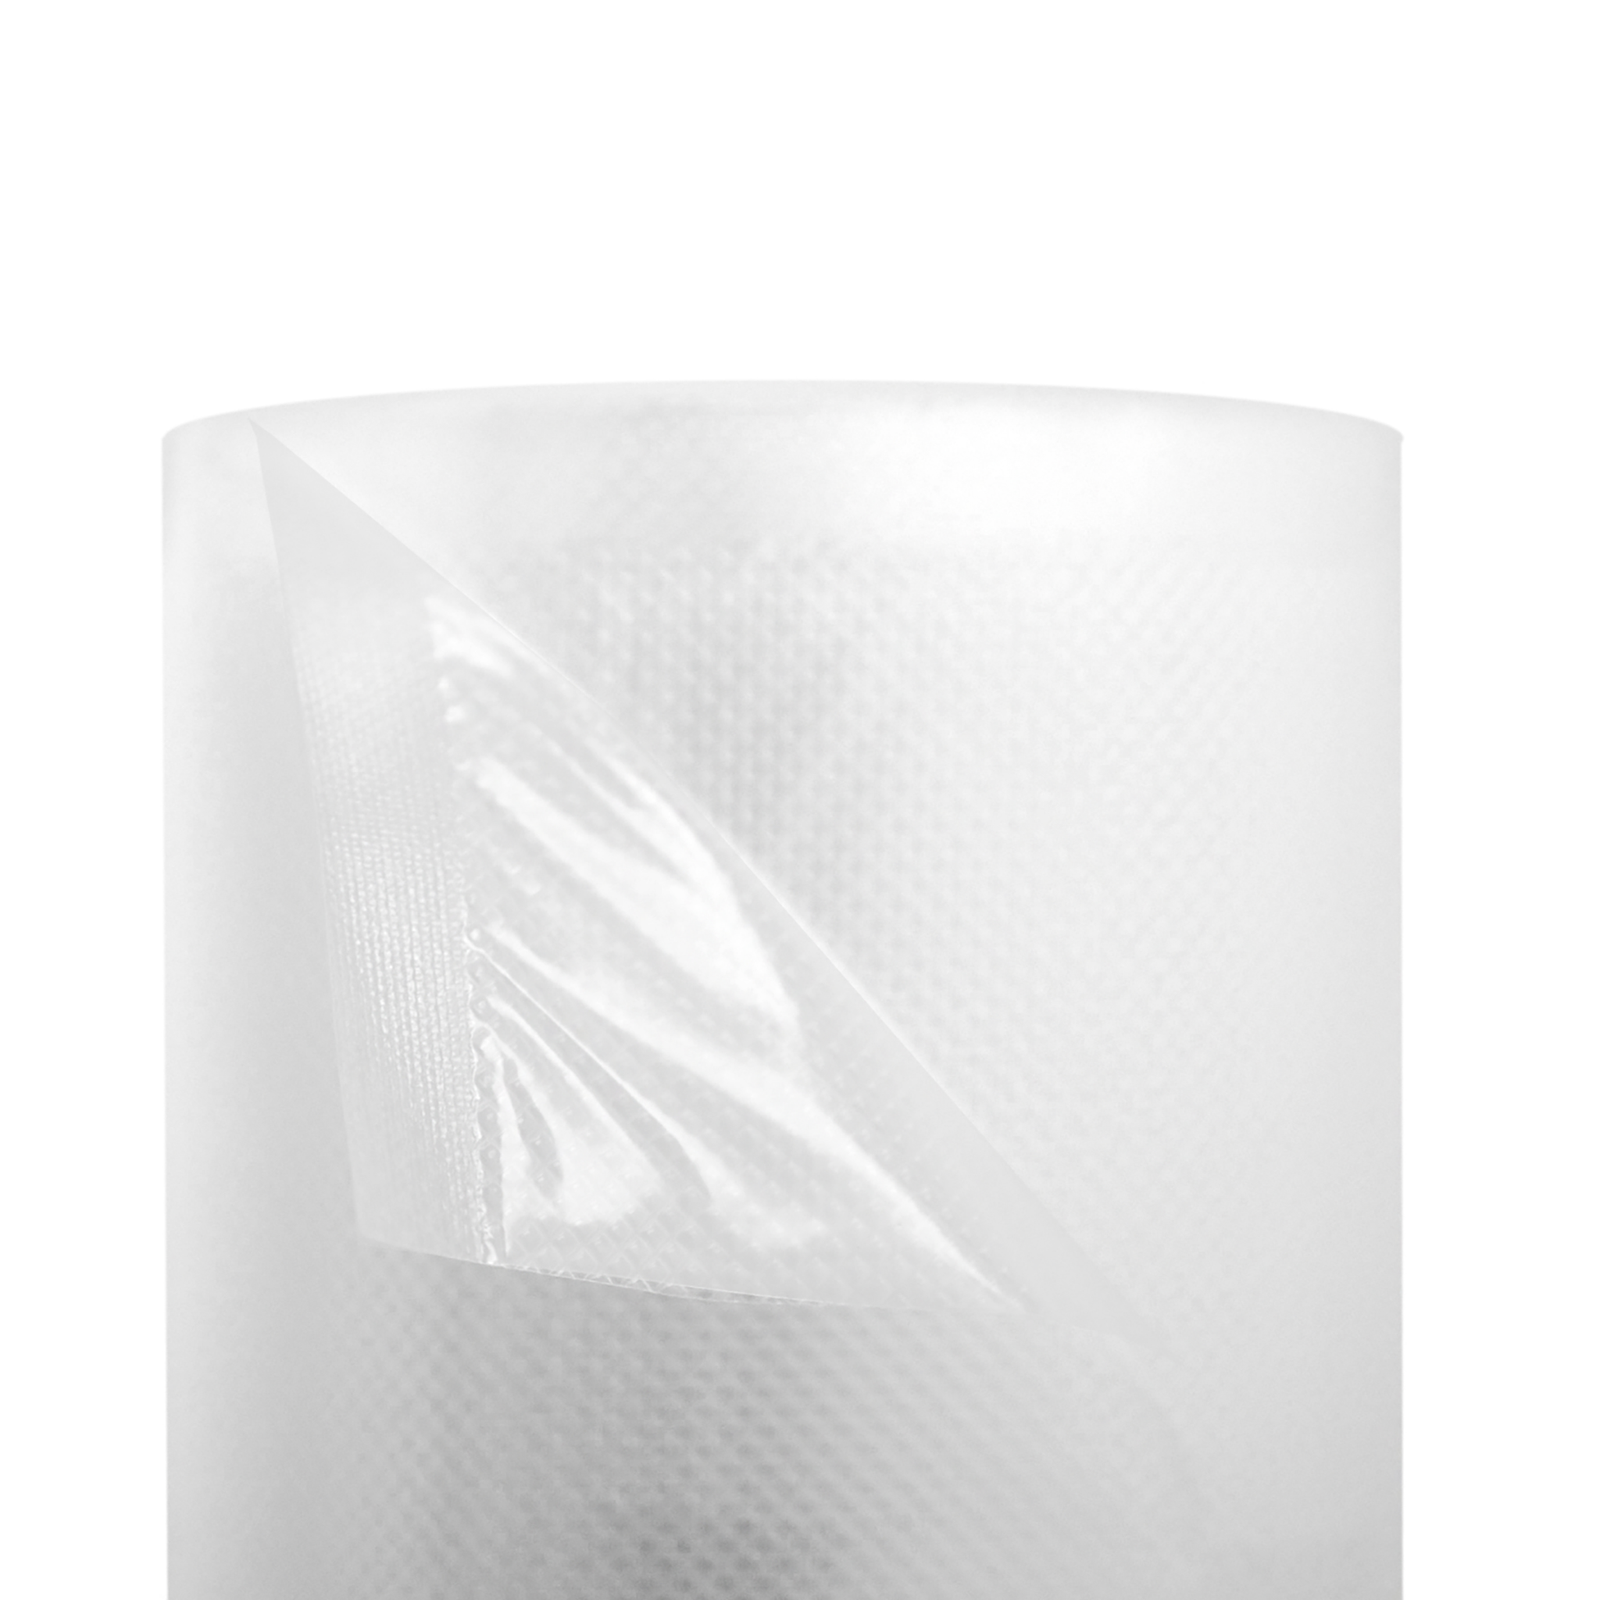 View of the embossed vacuum sealer plastic roll of 8 inches x 50 feet with write on label